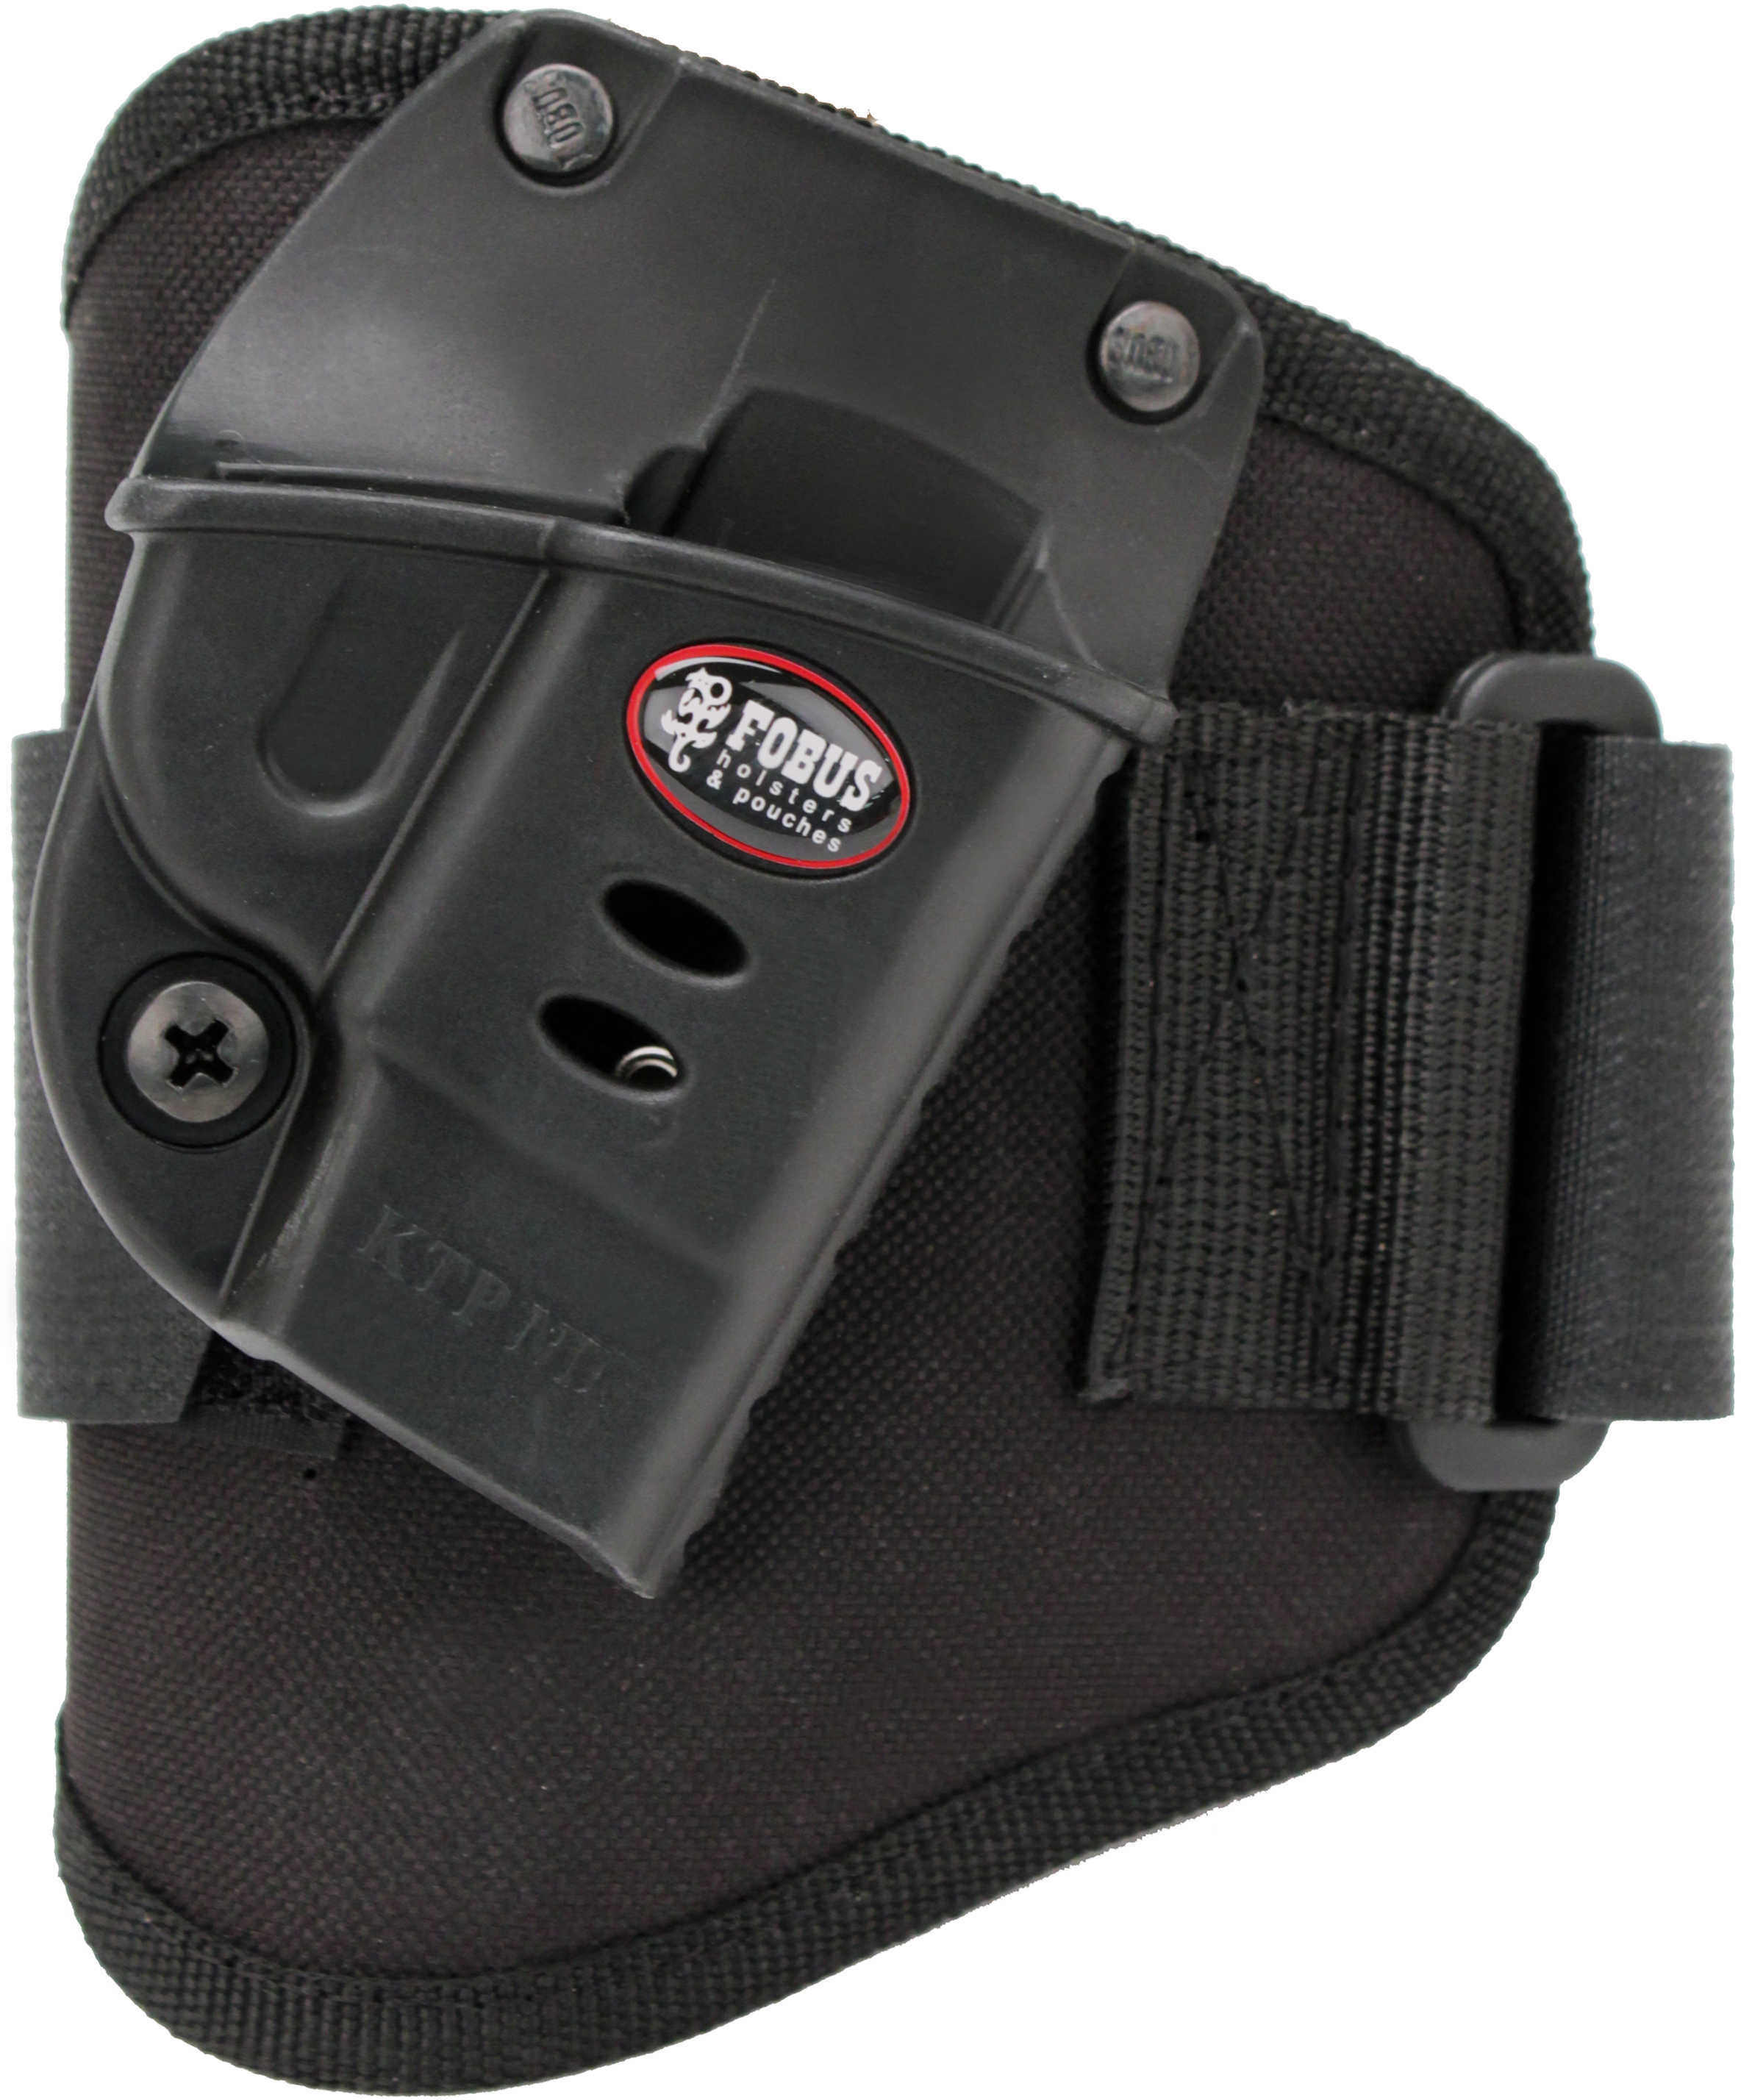 Fobus Holster Ankle For Ruger® LCP & KEL-TEC P-3AT 2Nd Gen.